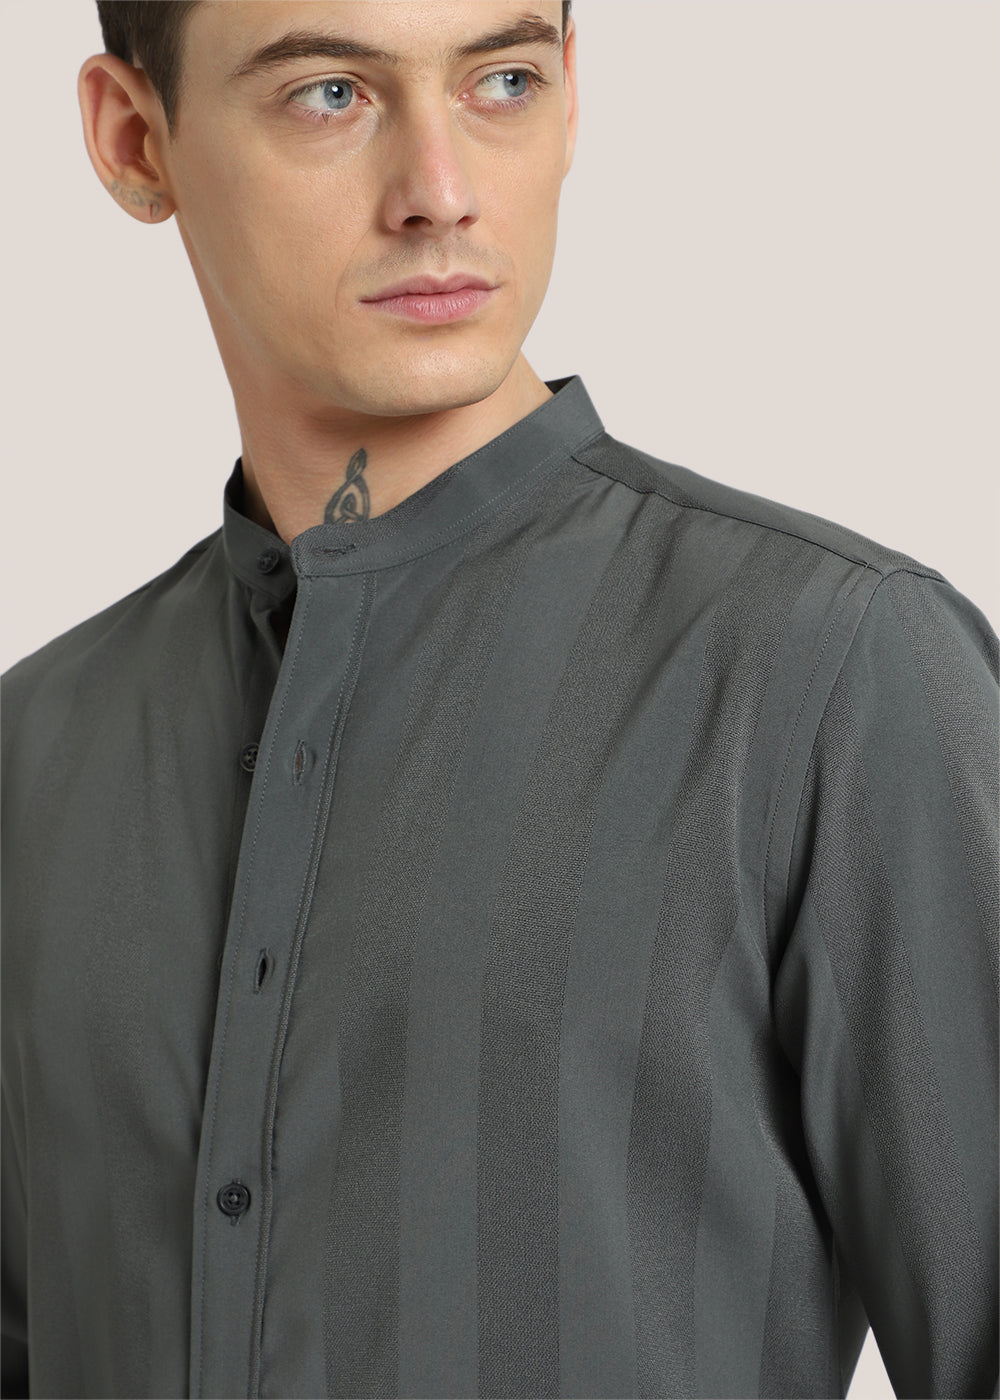 Stealth Grey Shein Patterned Shirt